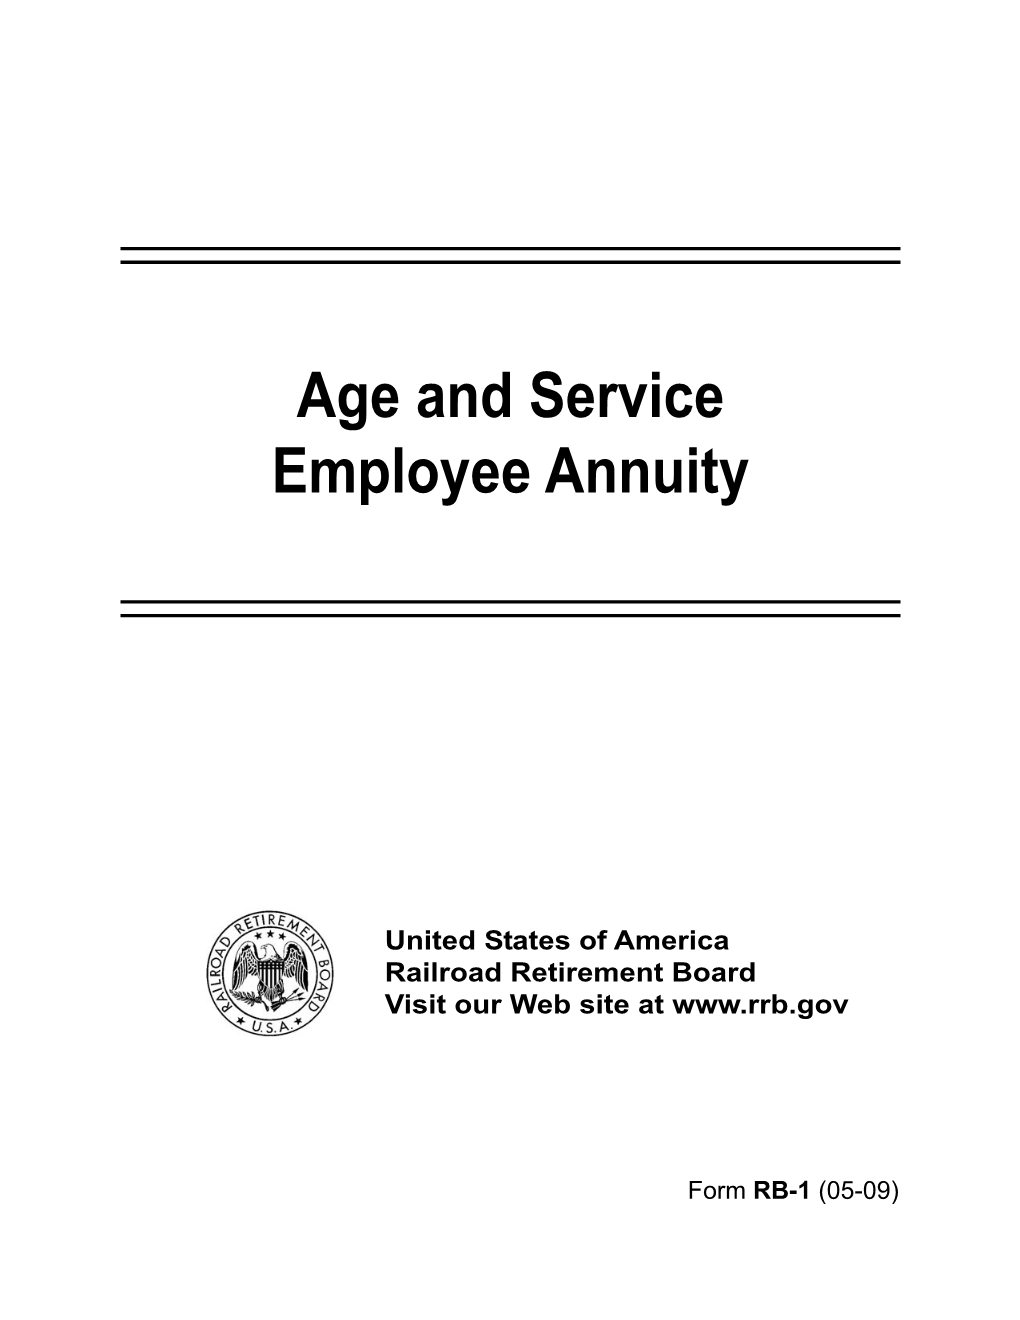 Age and Service Employee Annuity